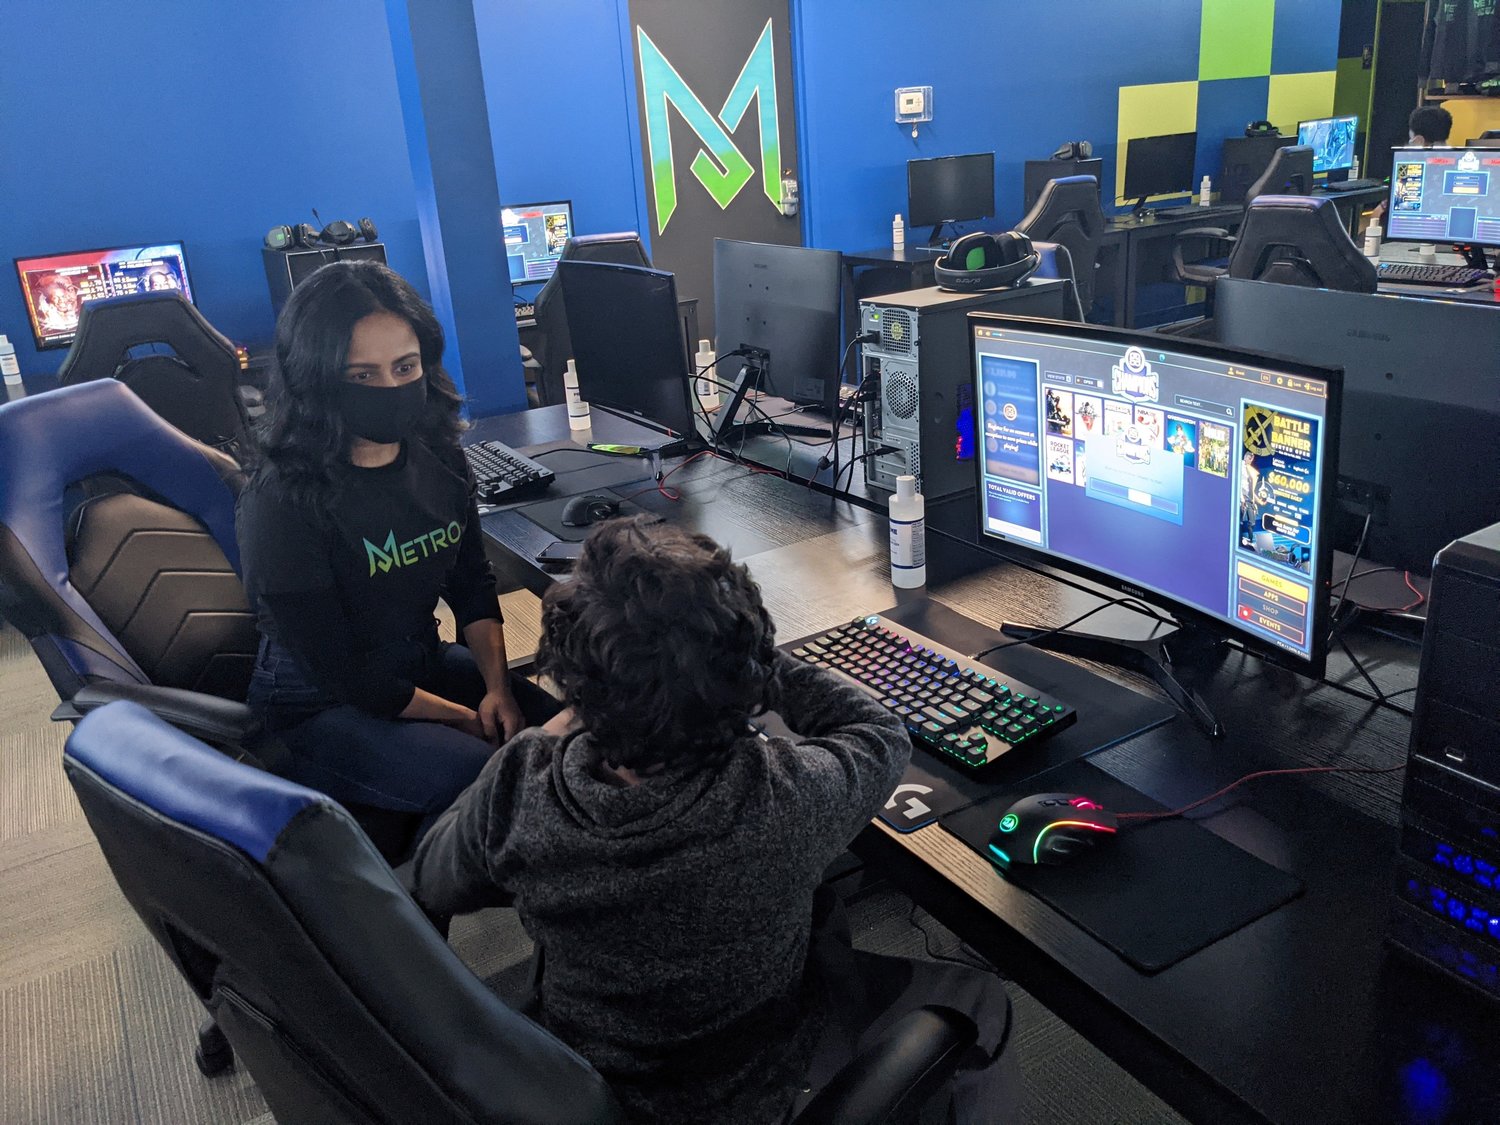 Metro Esports of Warminster signed an agreement with YMCA of Bucks County to open an Esports Gaming Lounge and Tech-based Education Center at the YMCA’s Doylestown branch.